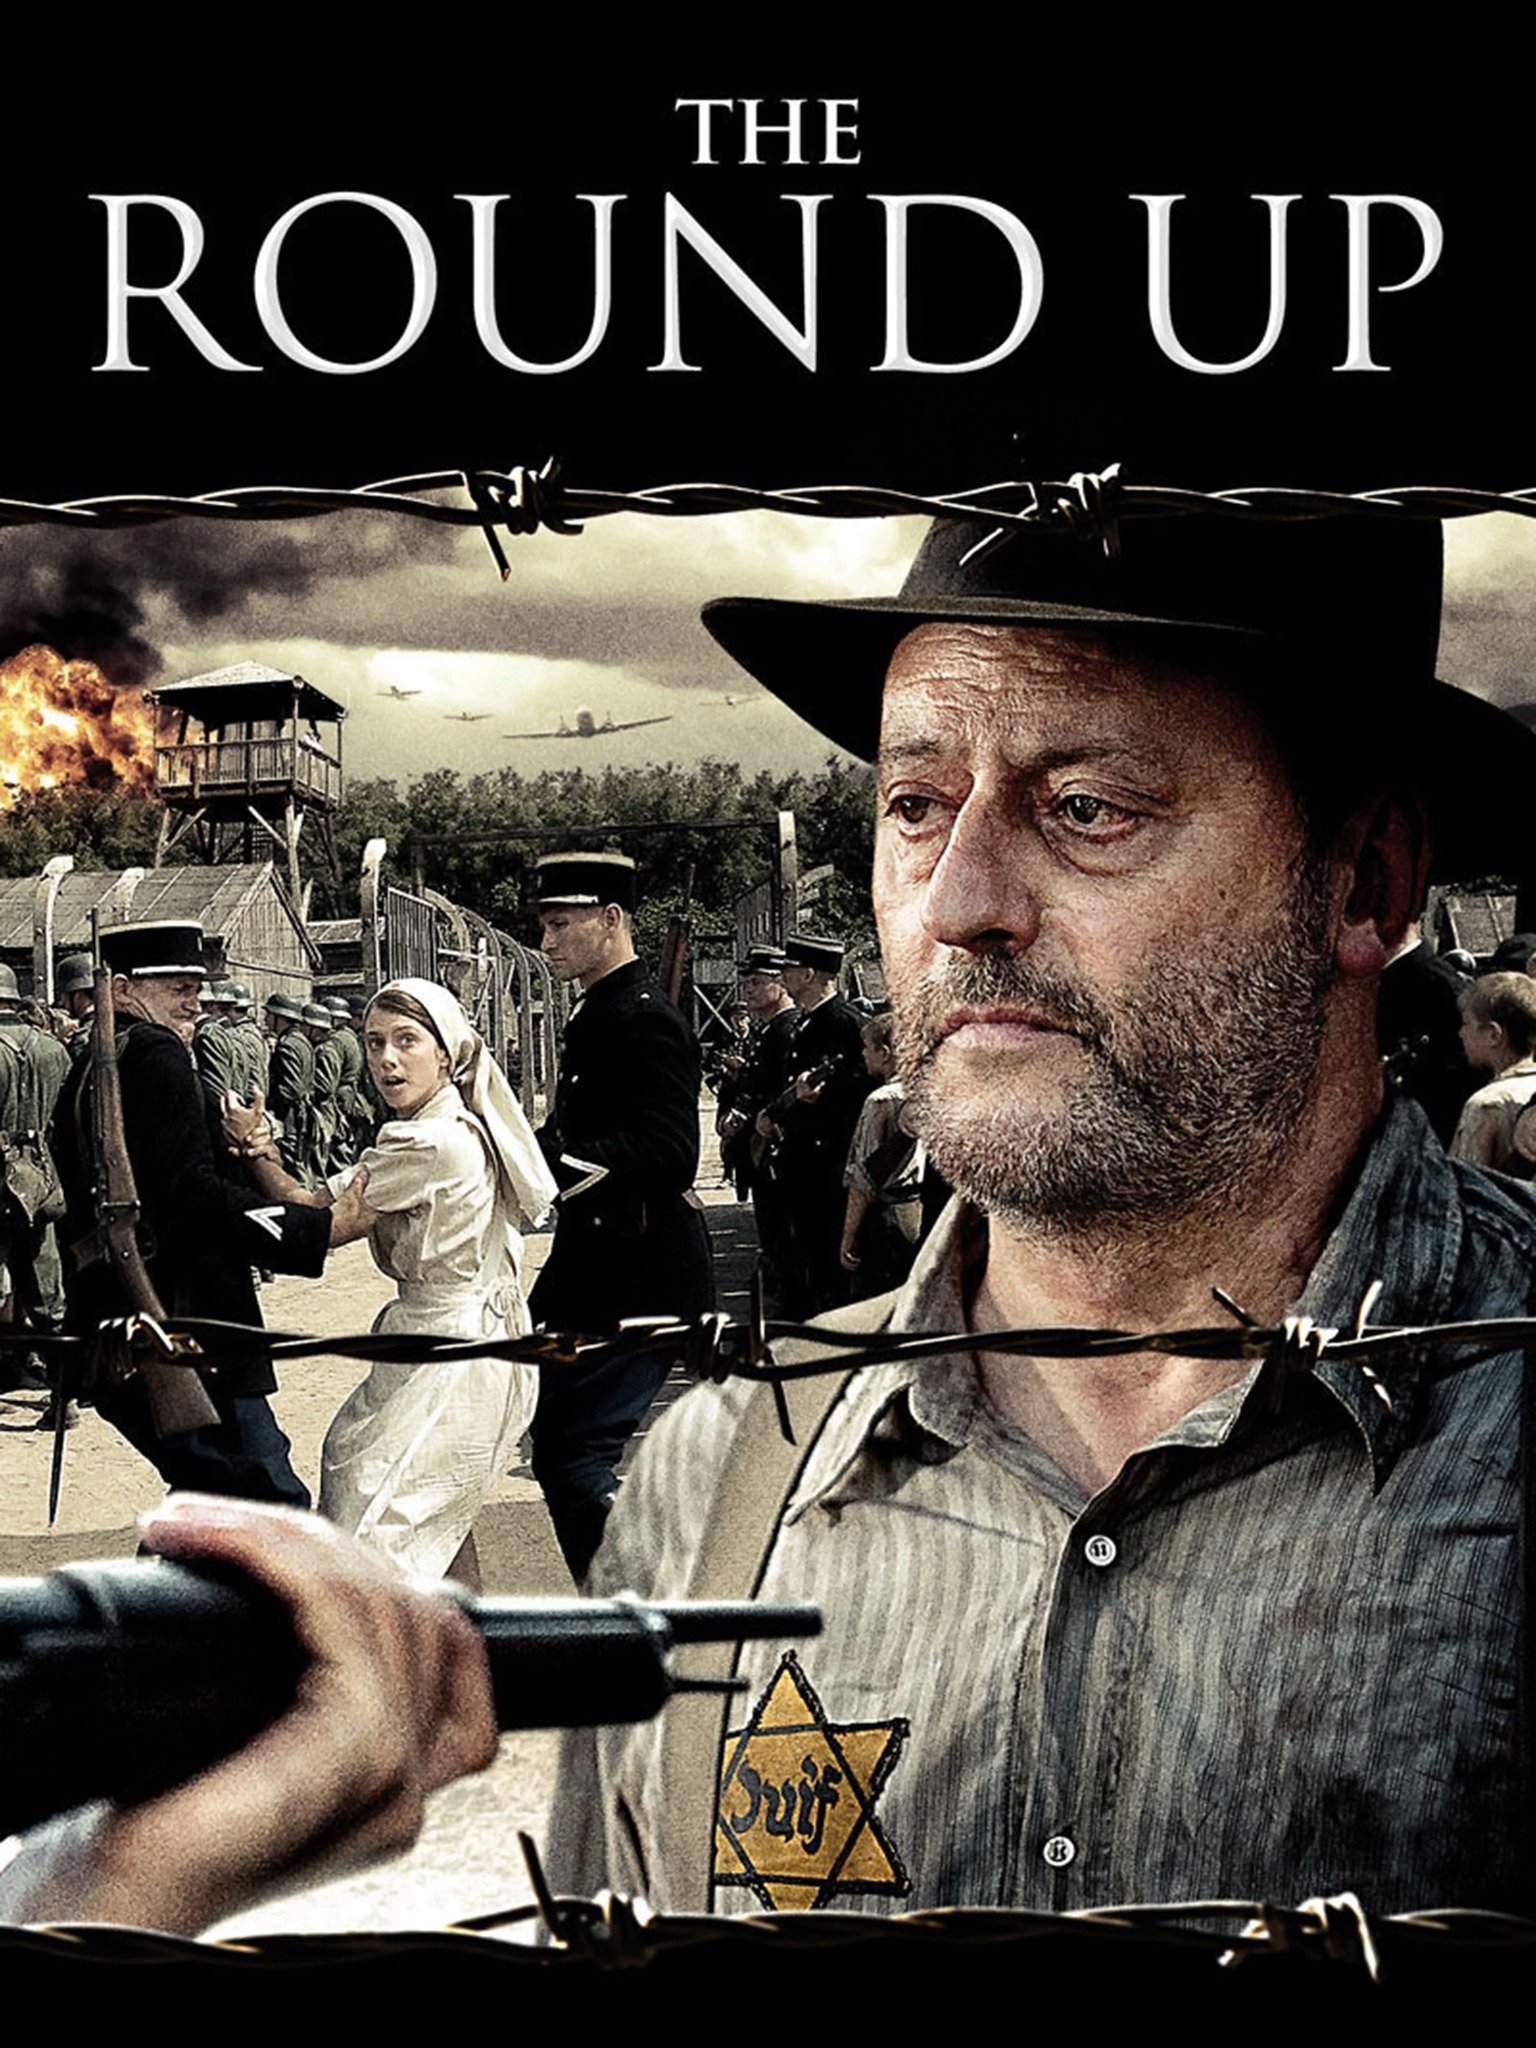 the round up movie review